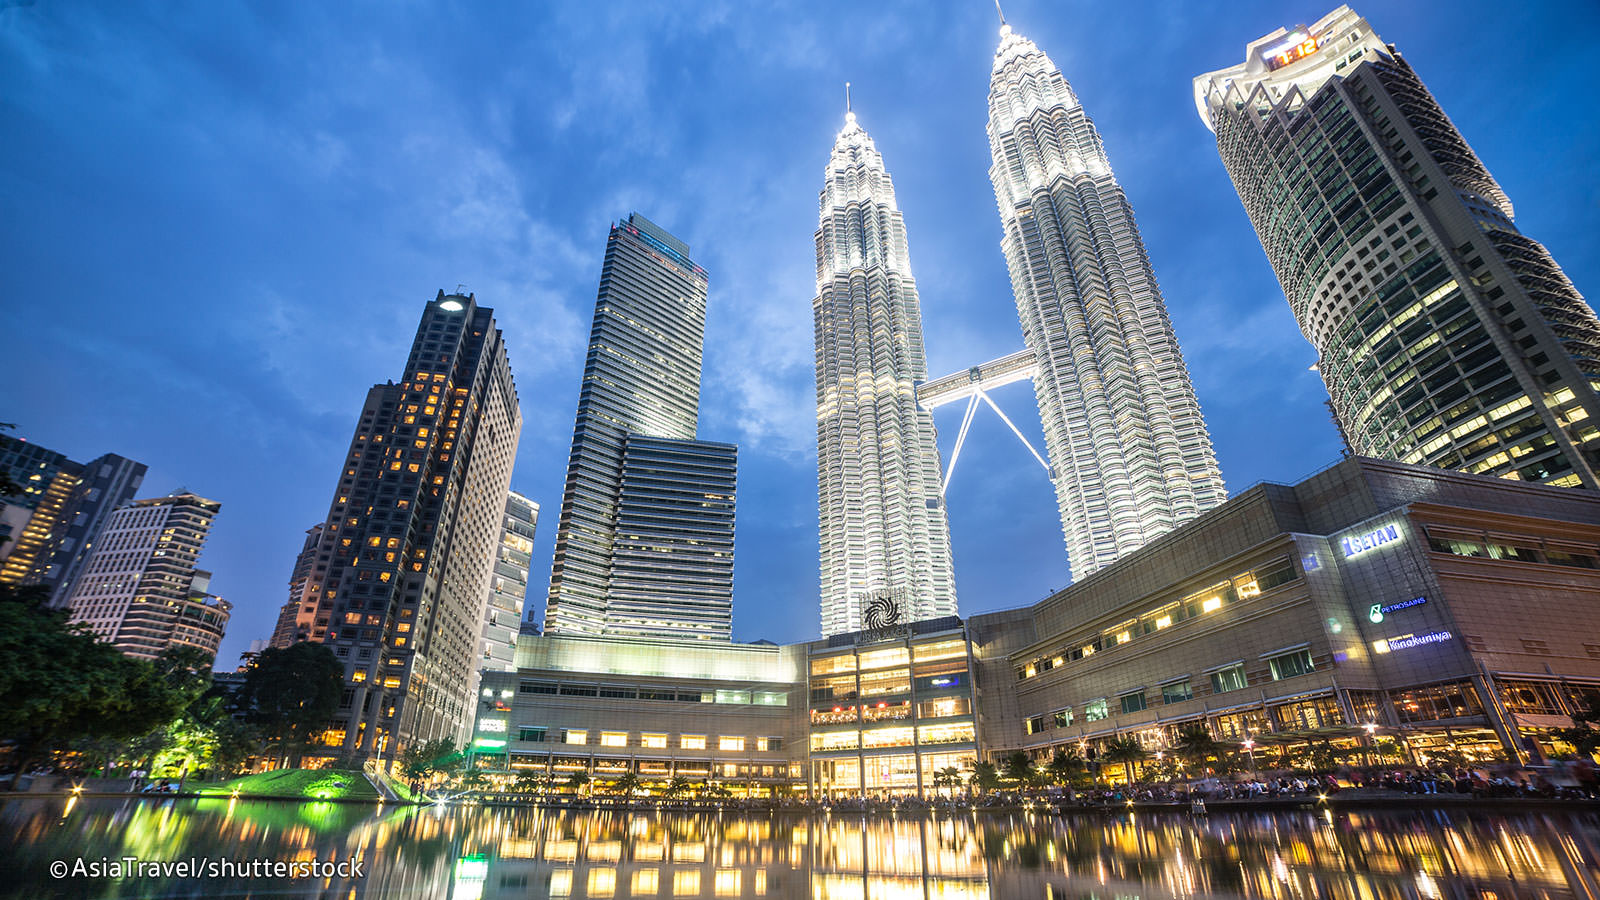 Top 10 Best Tourist Attractions in Kuala Lumpur, Malaysia - mommywinwin